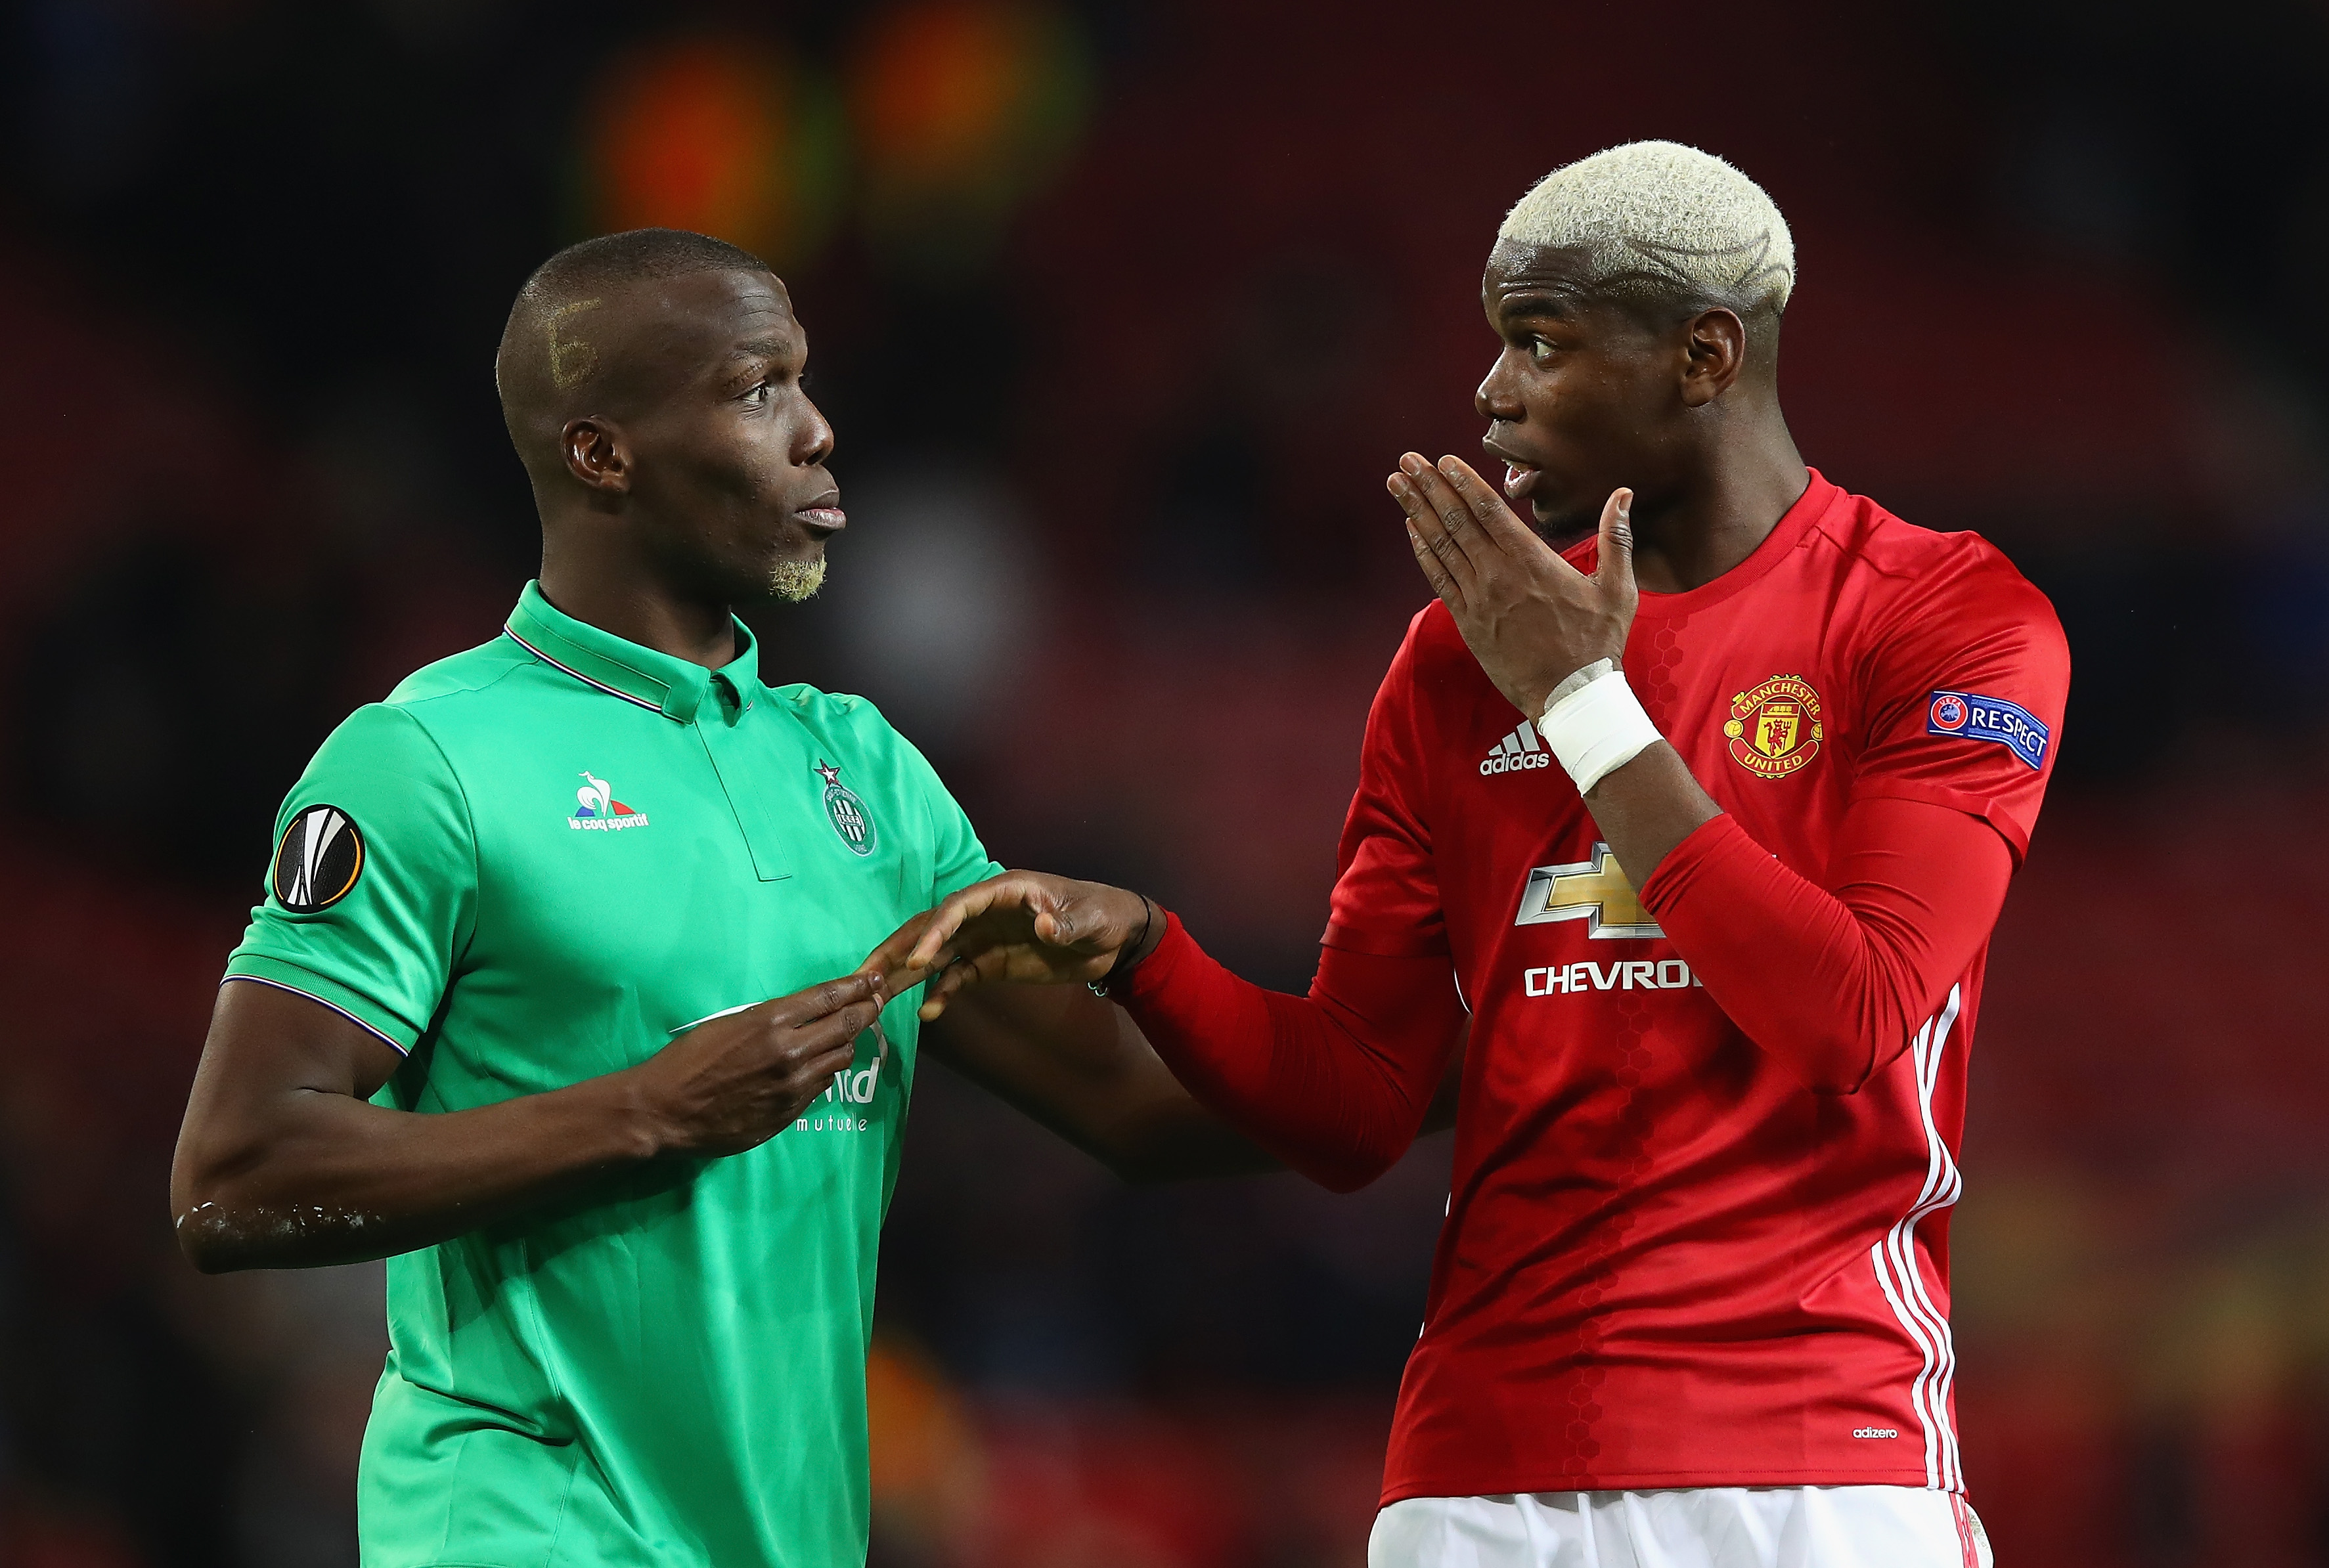 MANCHESTER, ENGLAND - FEBRUARY 16:  Paul Pogba of Manchester United (R) and Florentin Pogba of Saint Ettienne speak  during the UEFA Europa  League Round of 32 first leg match between Manchester United and AS Saint-Etienne at Old Trafford on February 16, 2017 in Manchester, United Kingdom.  (Photo by Clive Brunskill/Getty Images)